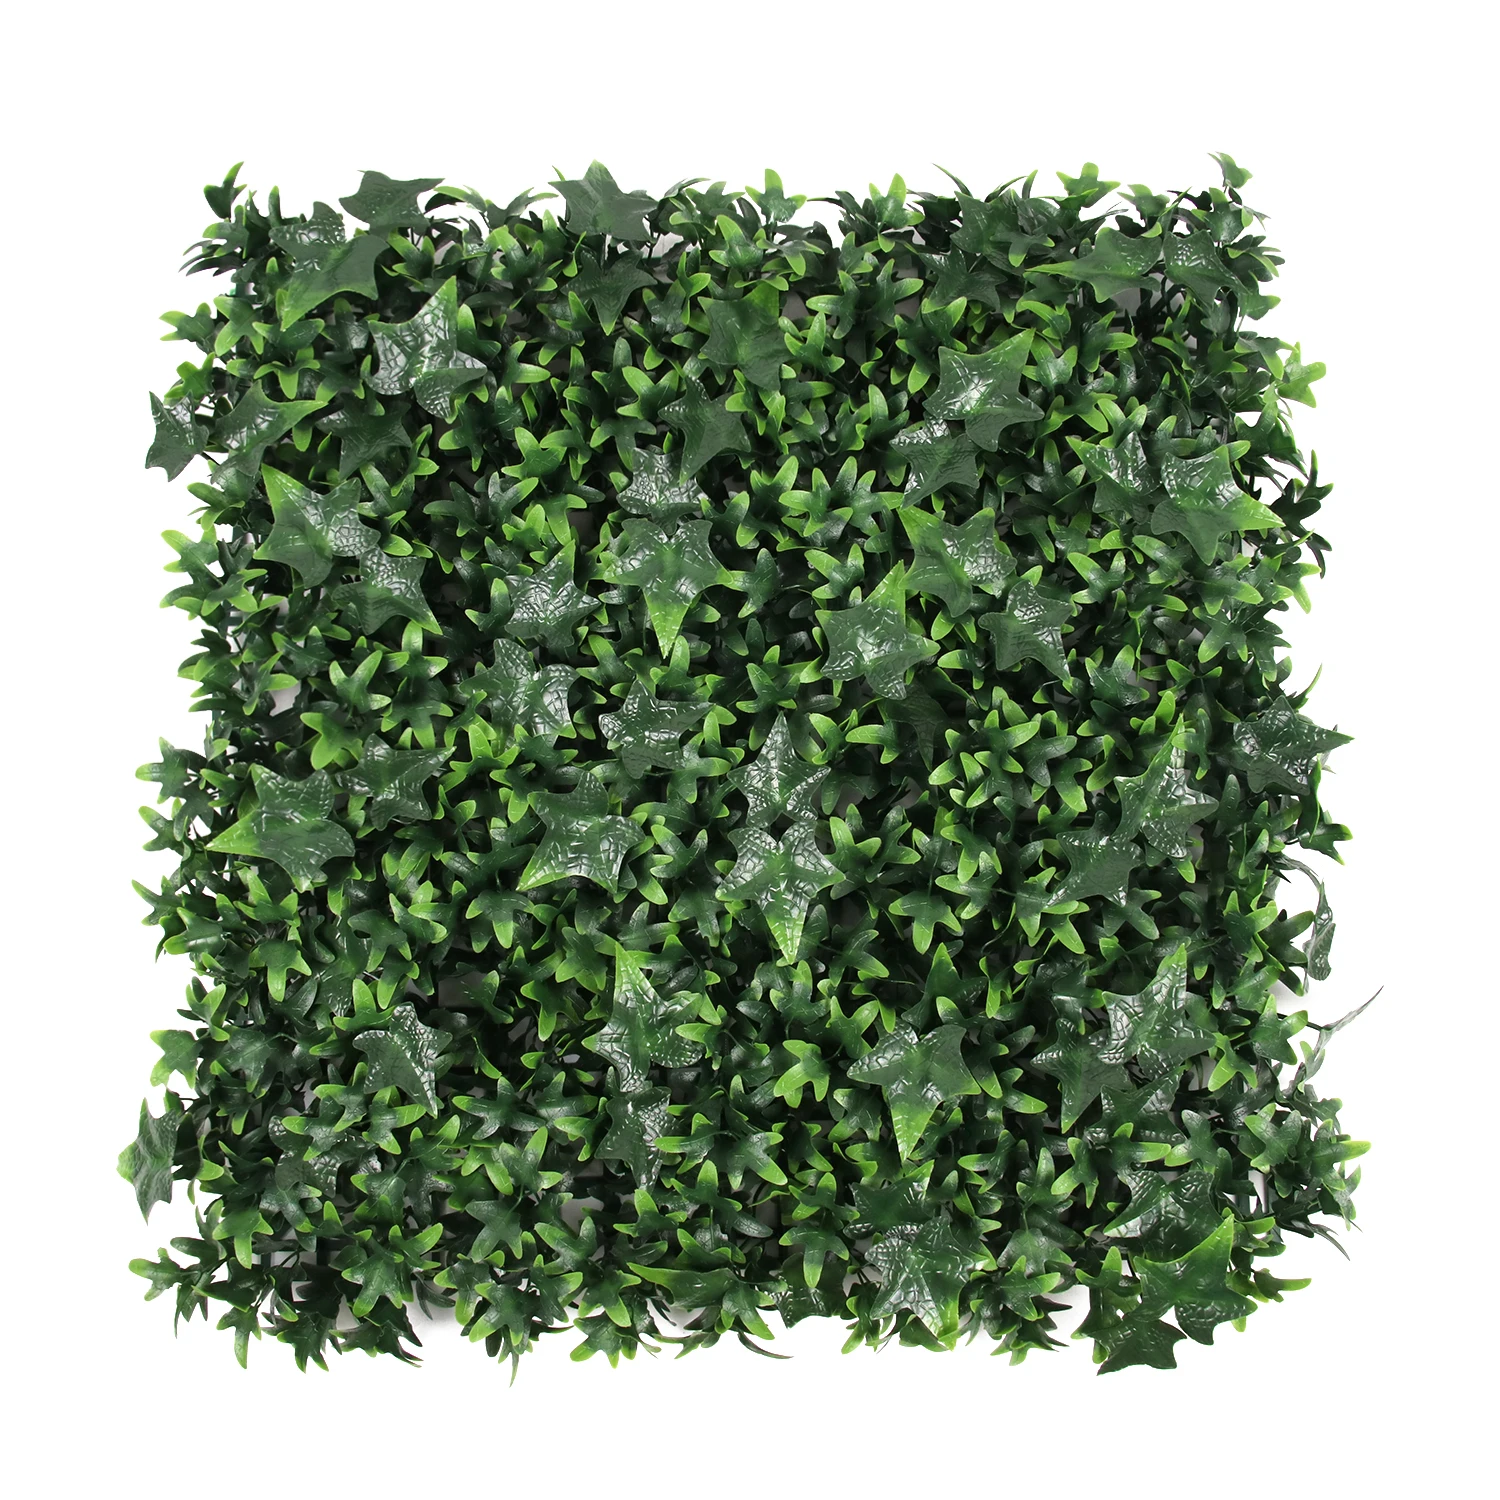 

Customized Simulation Boxwood Panels Topiary Hedge Plants Artificial Greenery Fence Panels For Garden Decoration, Green color